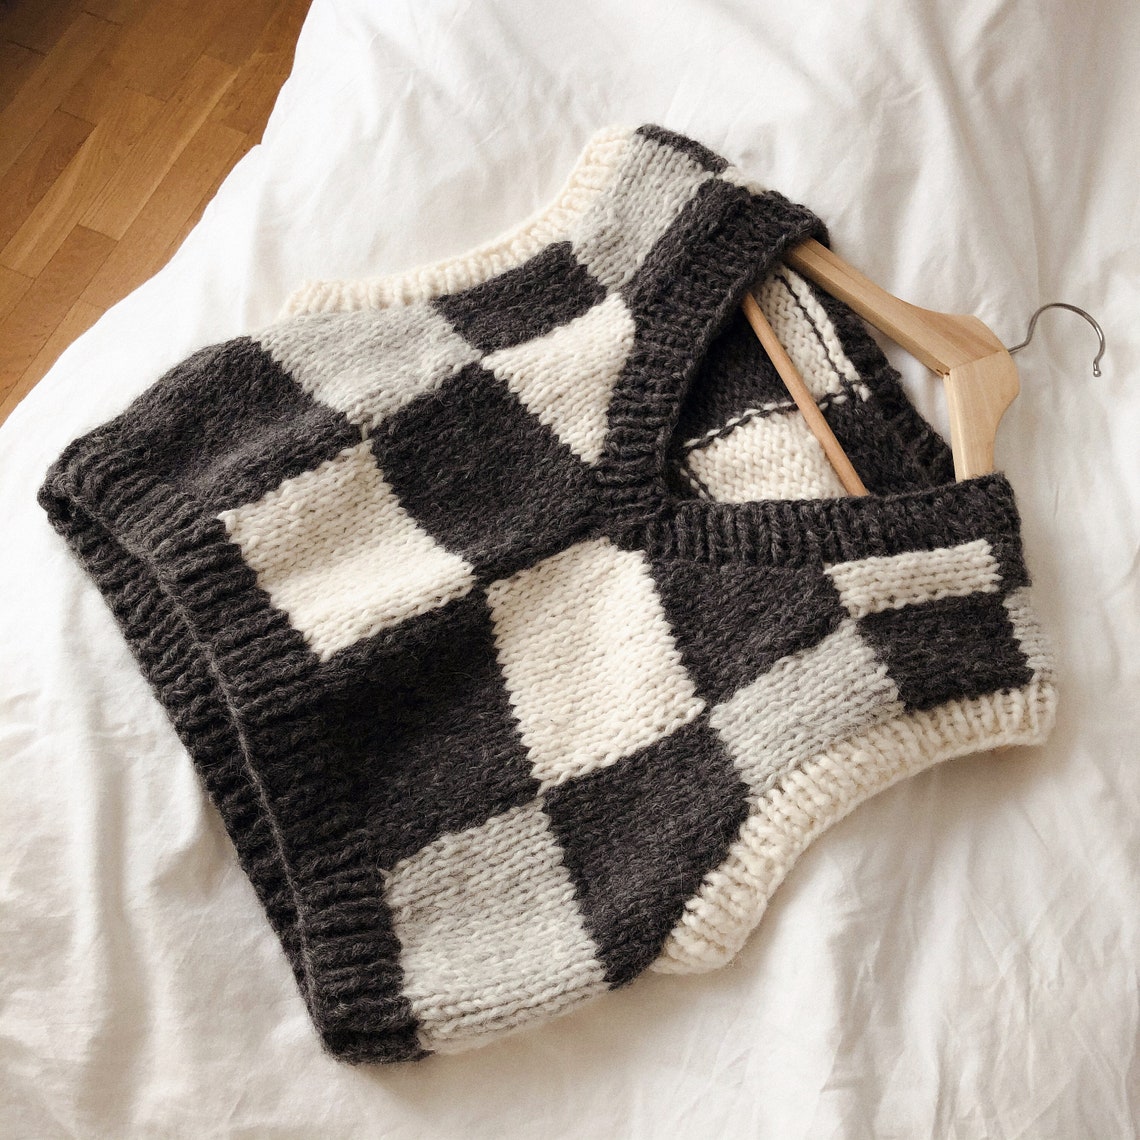 knit patterns designed by Bethany of Well Loved Knits #knitting #handmade